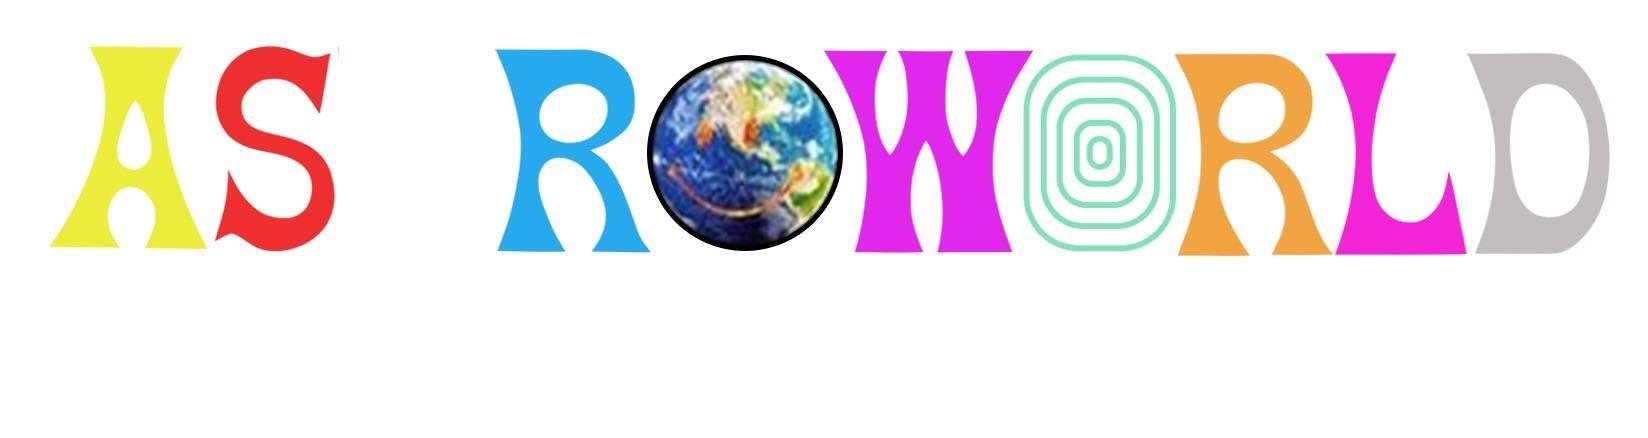 Astroworld Logo - For the person who requested the Astroworld logo png : travisscott